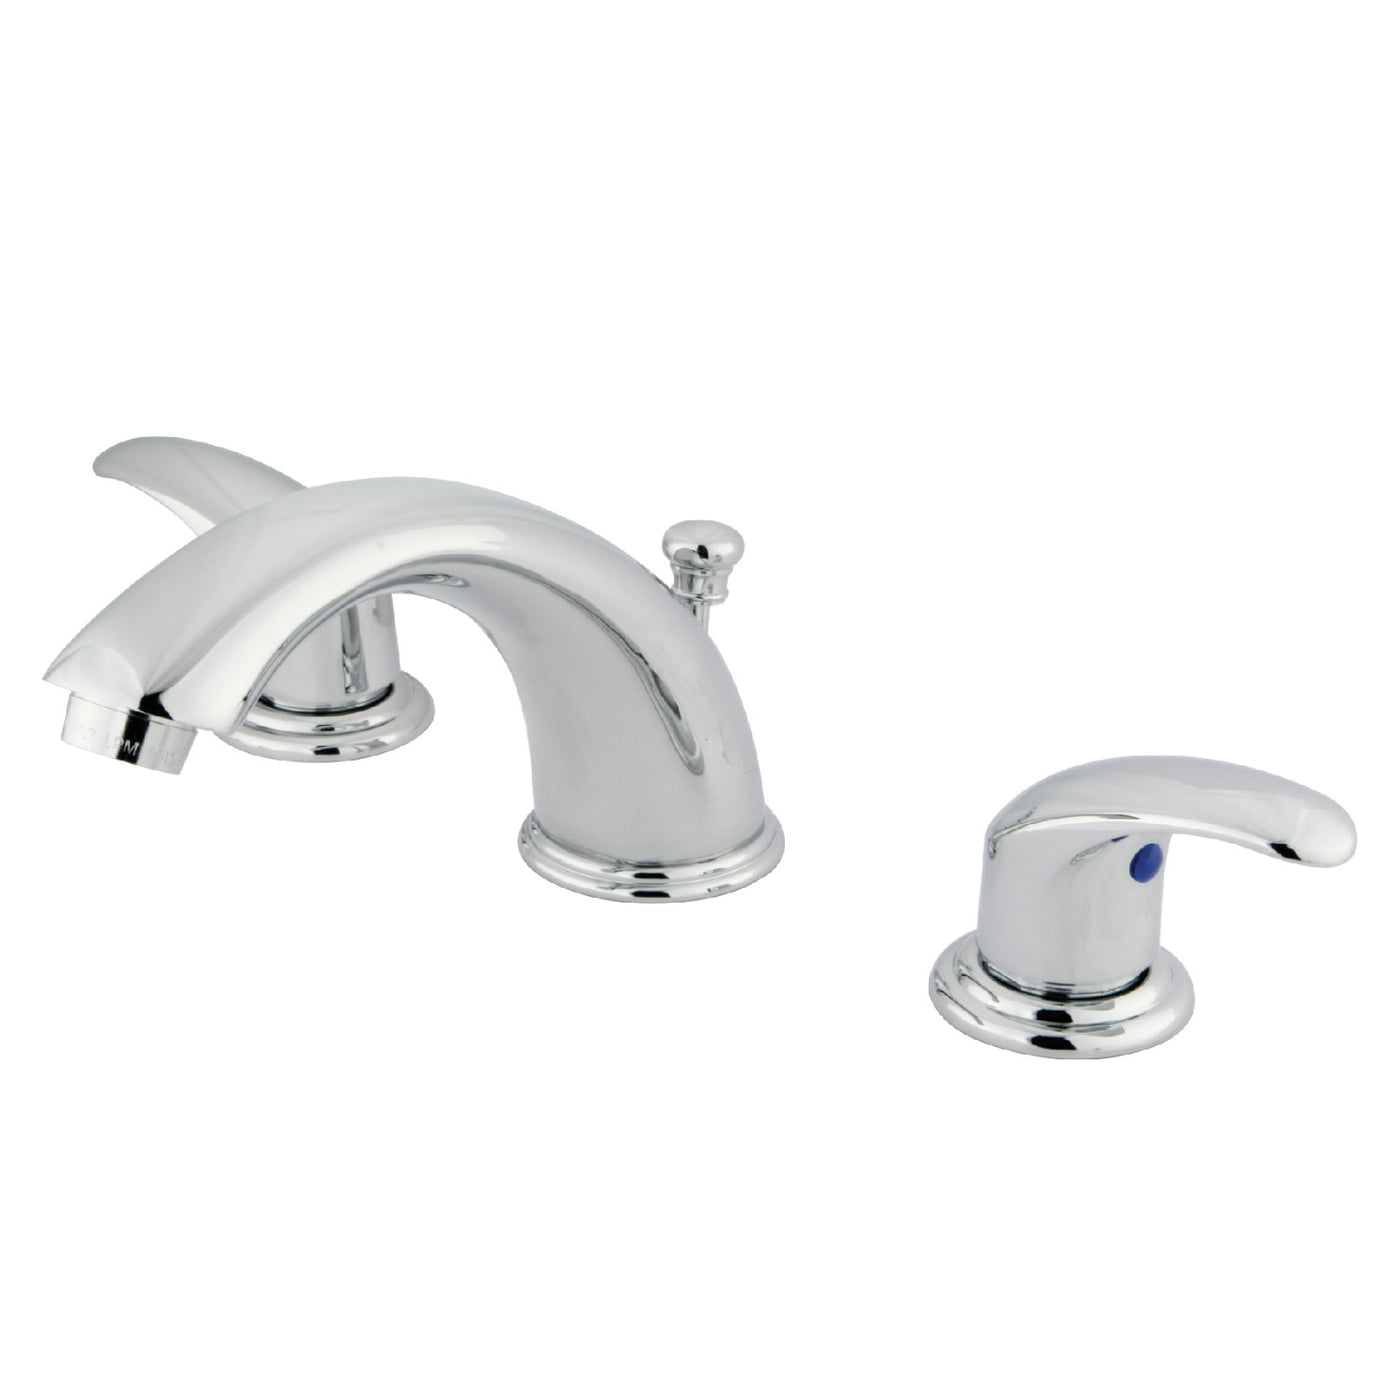 Elements of Design EB6961LL Widespread Bathroom Faucet with Retail Pop-Up, Polished Chrome